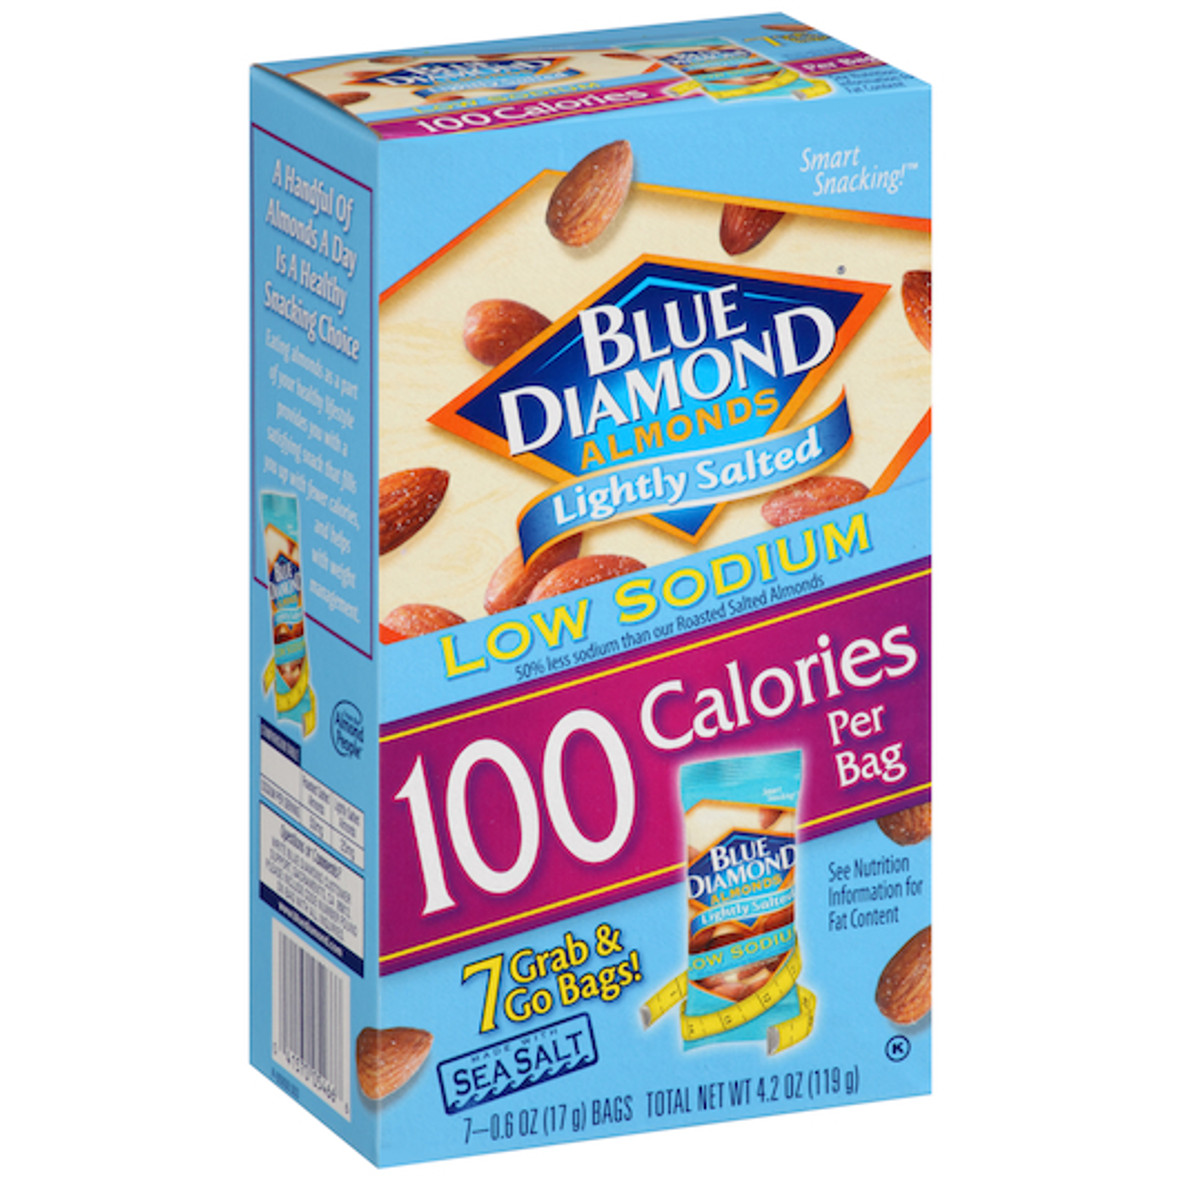 Blue Diamond Almonds Lightly Salted 100 Calorie Pack, 4.2 Ounce, 6 per case